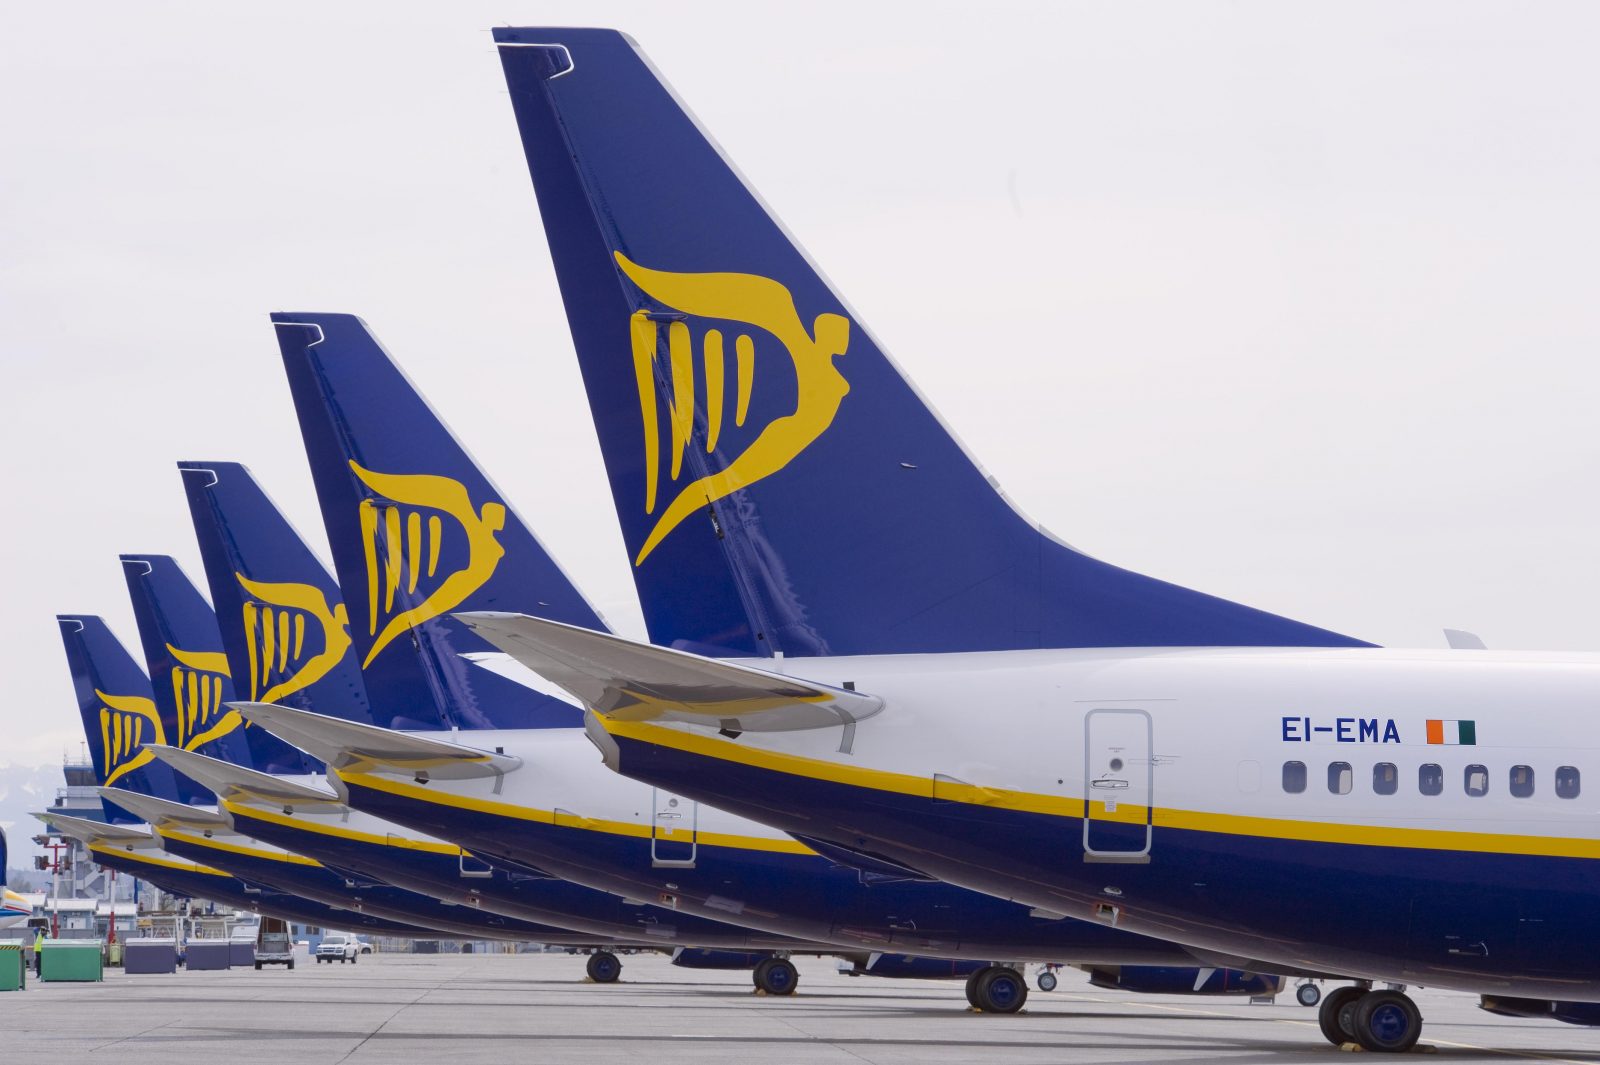 Ryanair's Report Card On Becoming a Fair Employer: Could Do Better